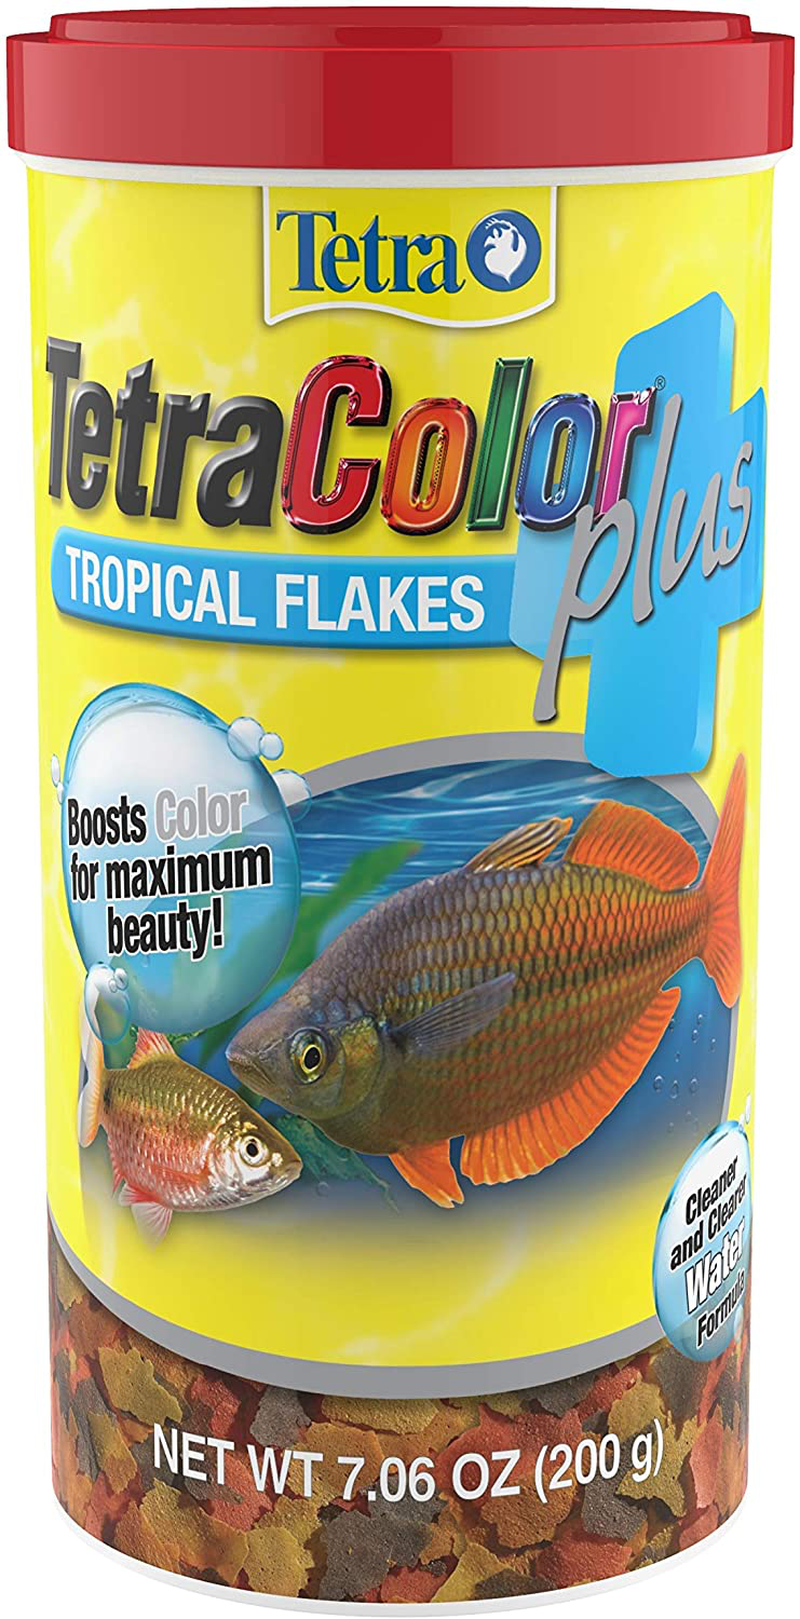 TetraColor Plus Tropical Flakes with Color Enhancing